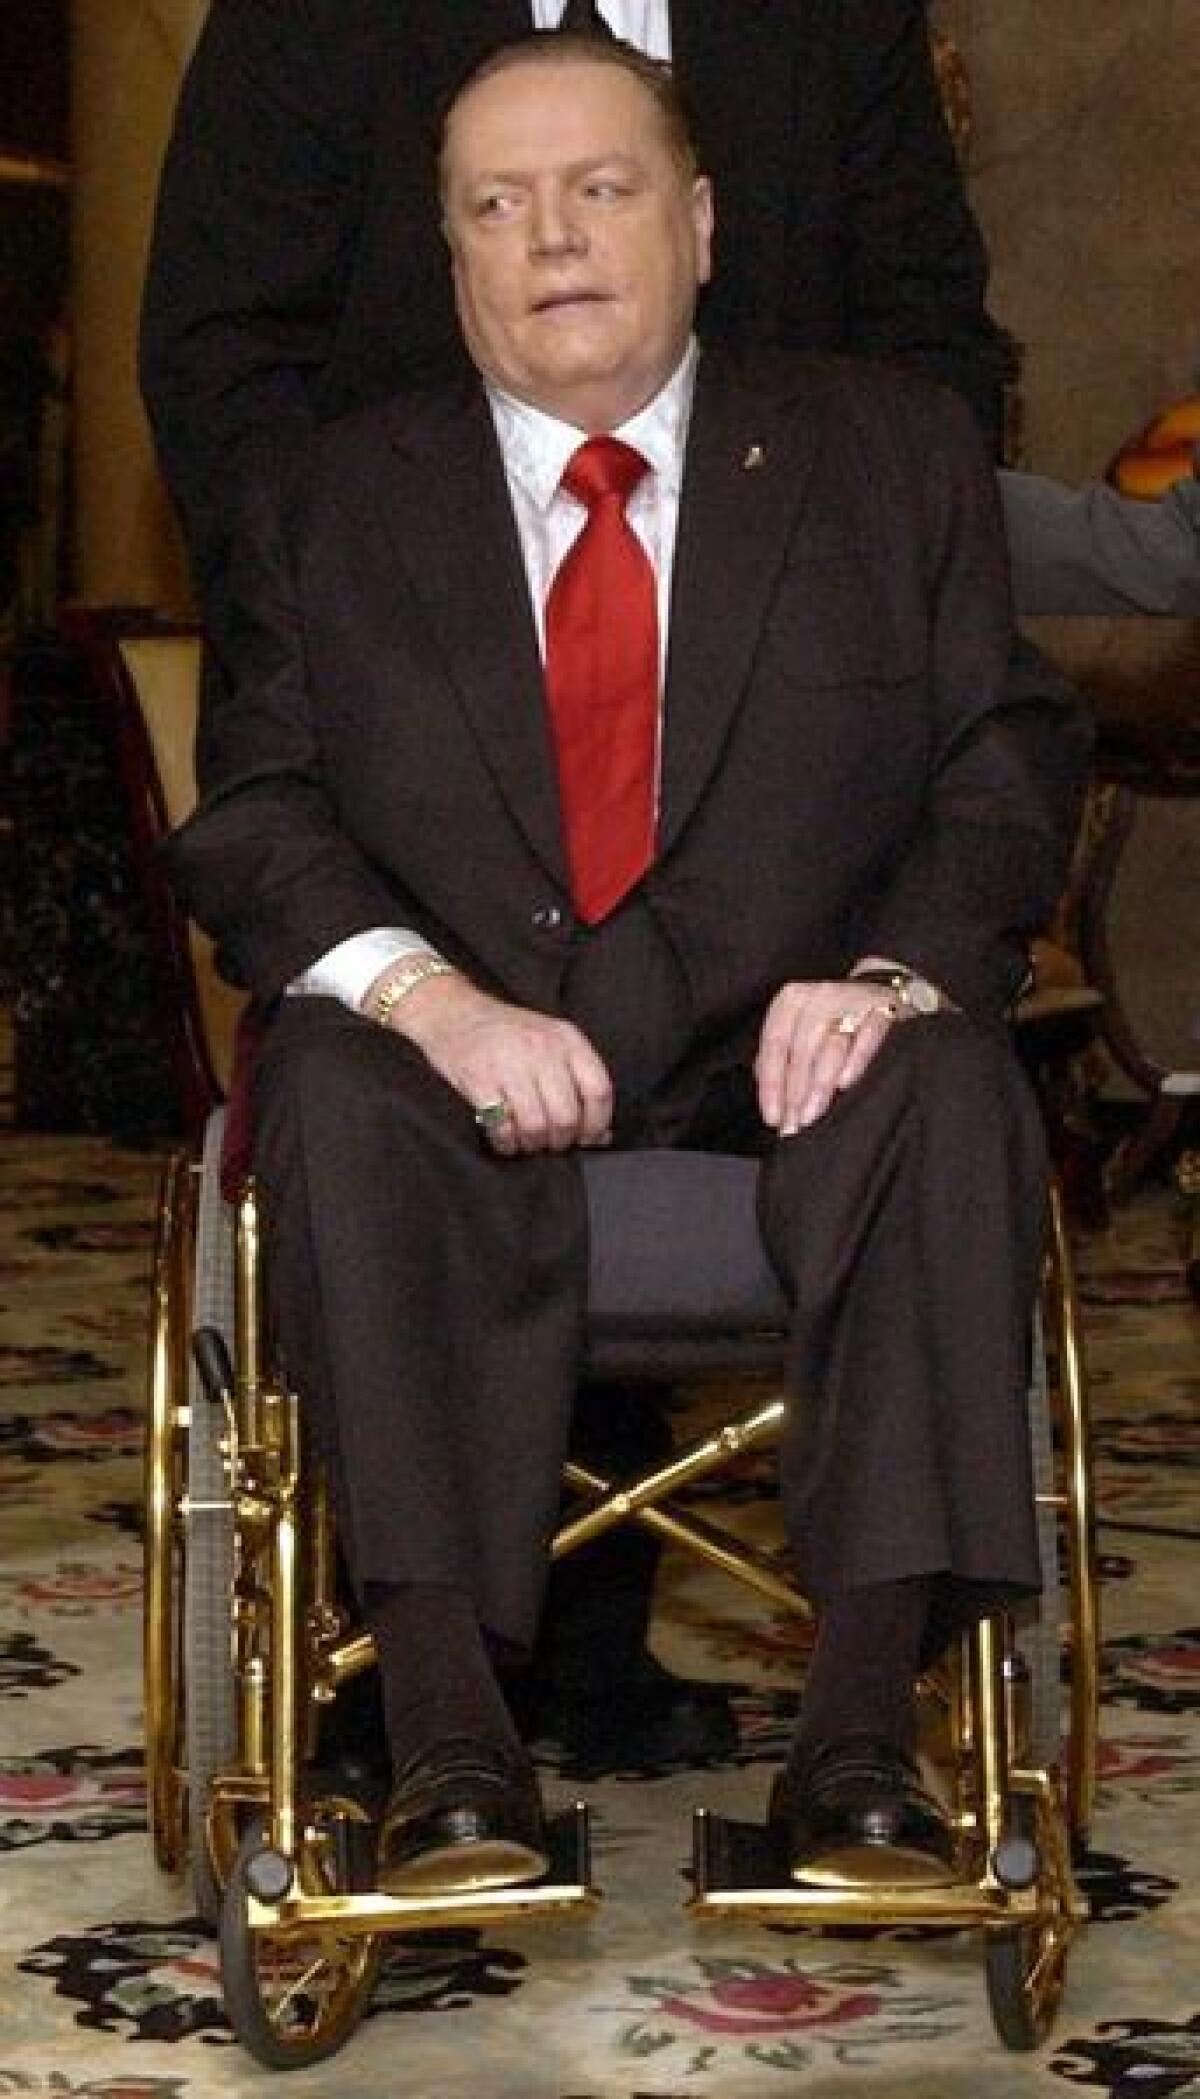 Huster magazine publisher Larry Flynt at a Beverly Hills press conference in 2003.